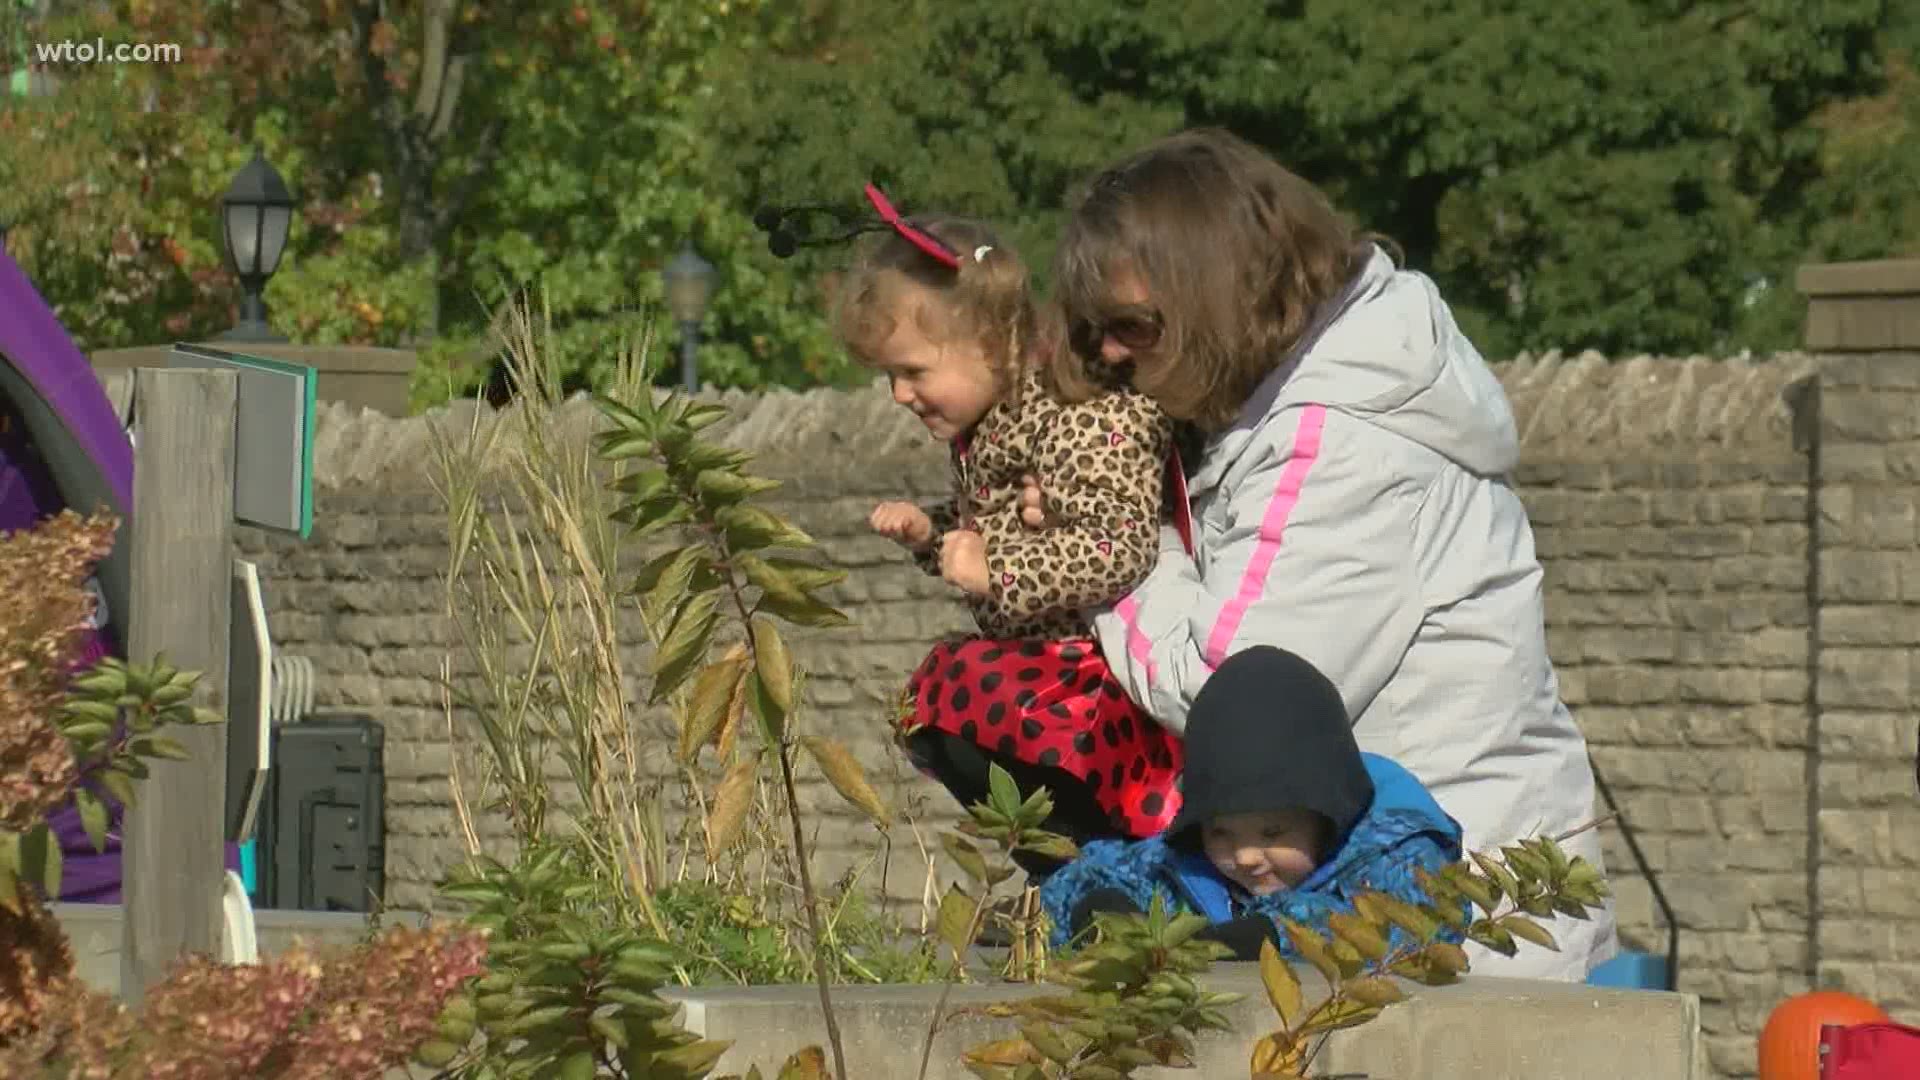 The popular Halloween celebrations will take place this season Oct. 15-18 at the Toledo Zoo.